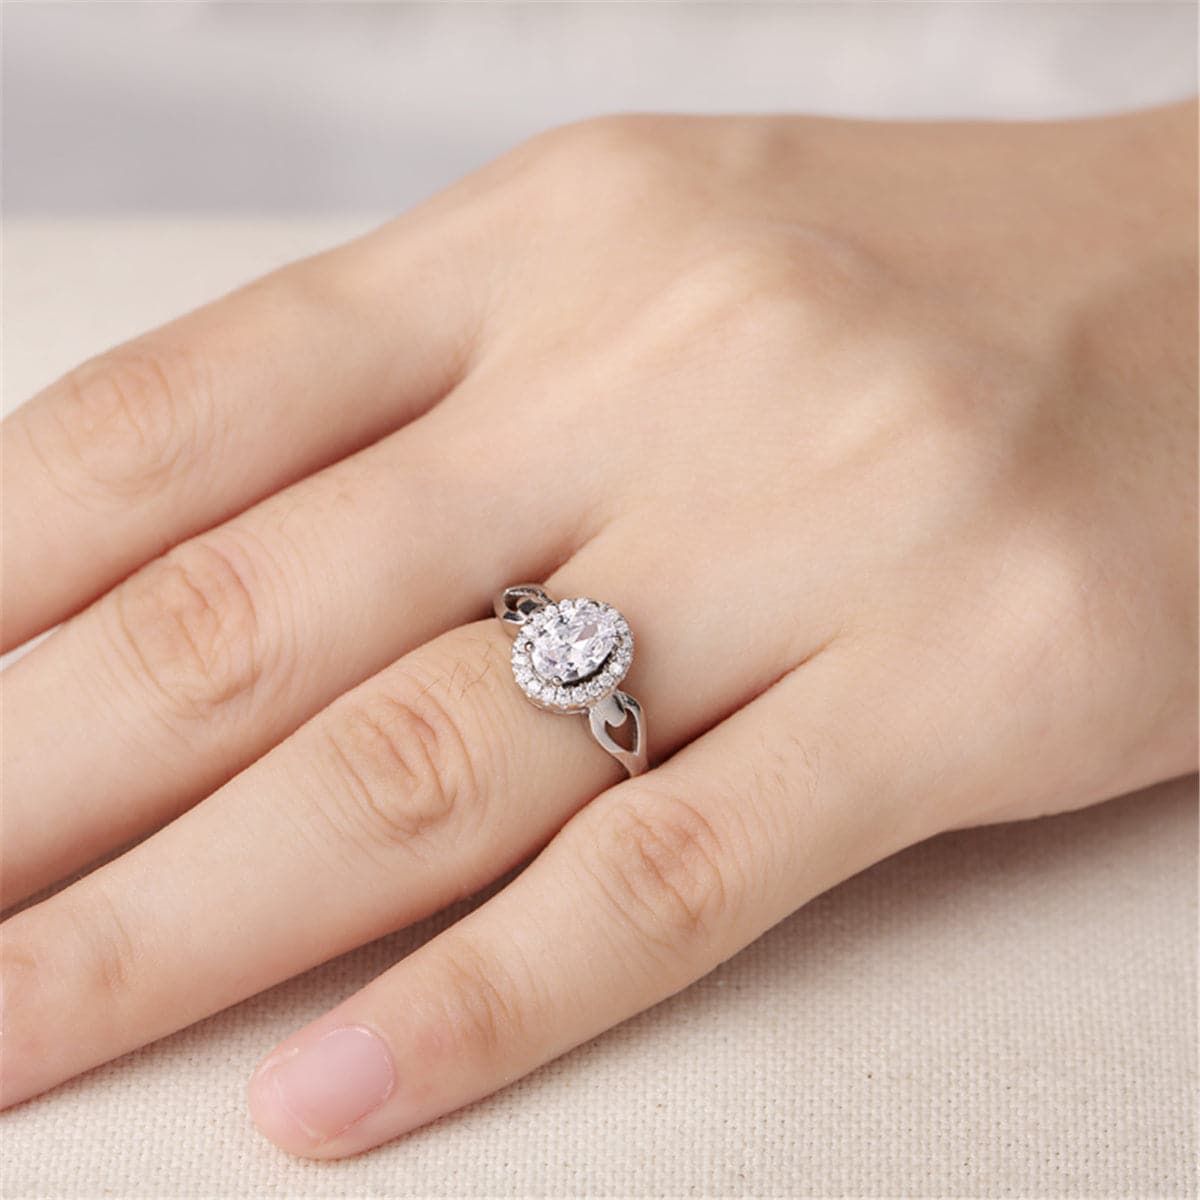 Cubic Zirconia & Sterling Silver Hola Adjustable Ring